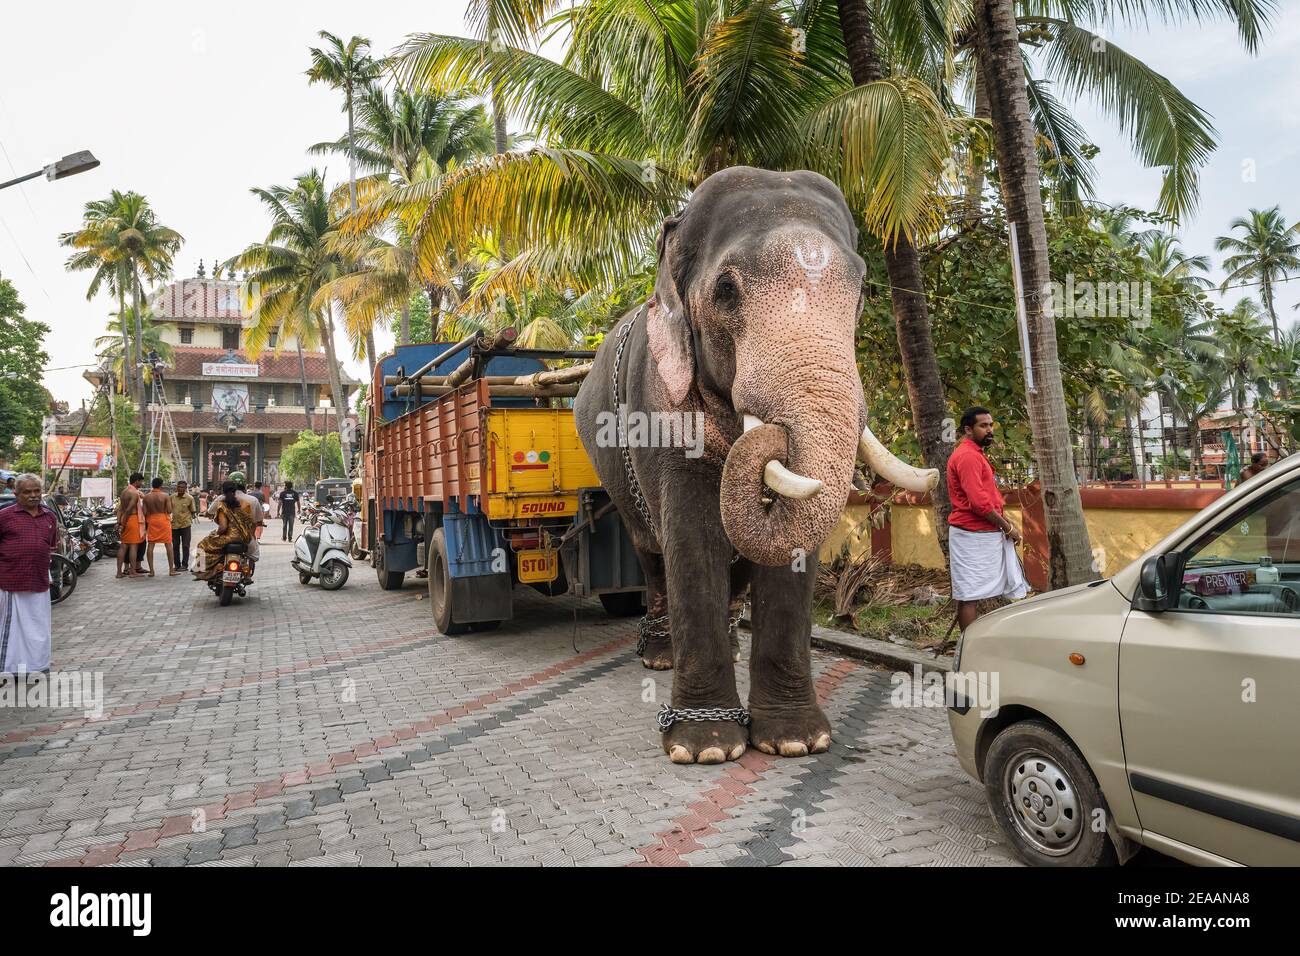 Temple elephant parked on the street in Fort Kochi, India Stock Photo